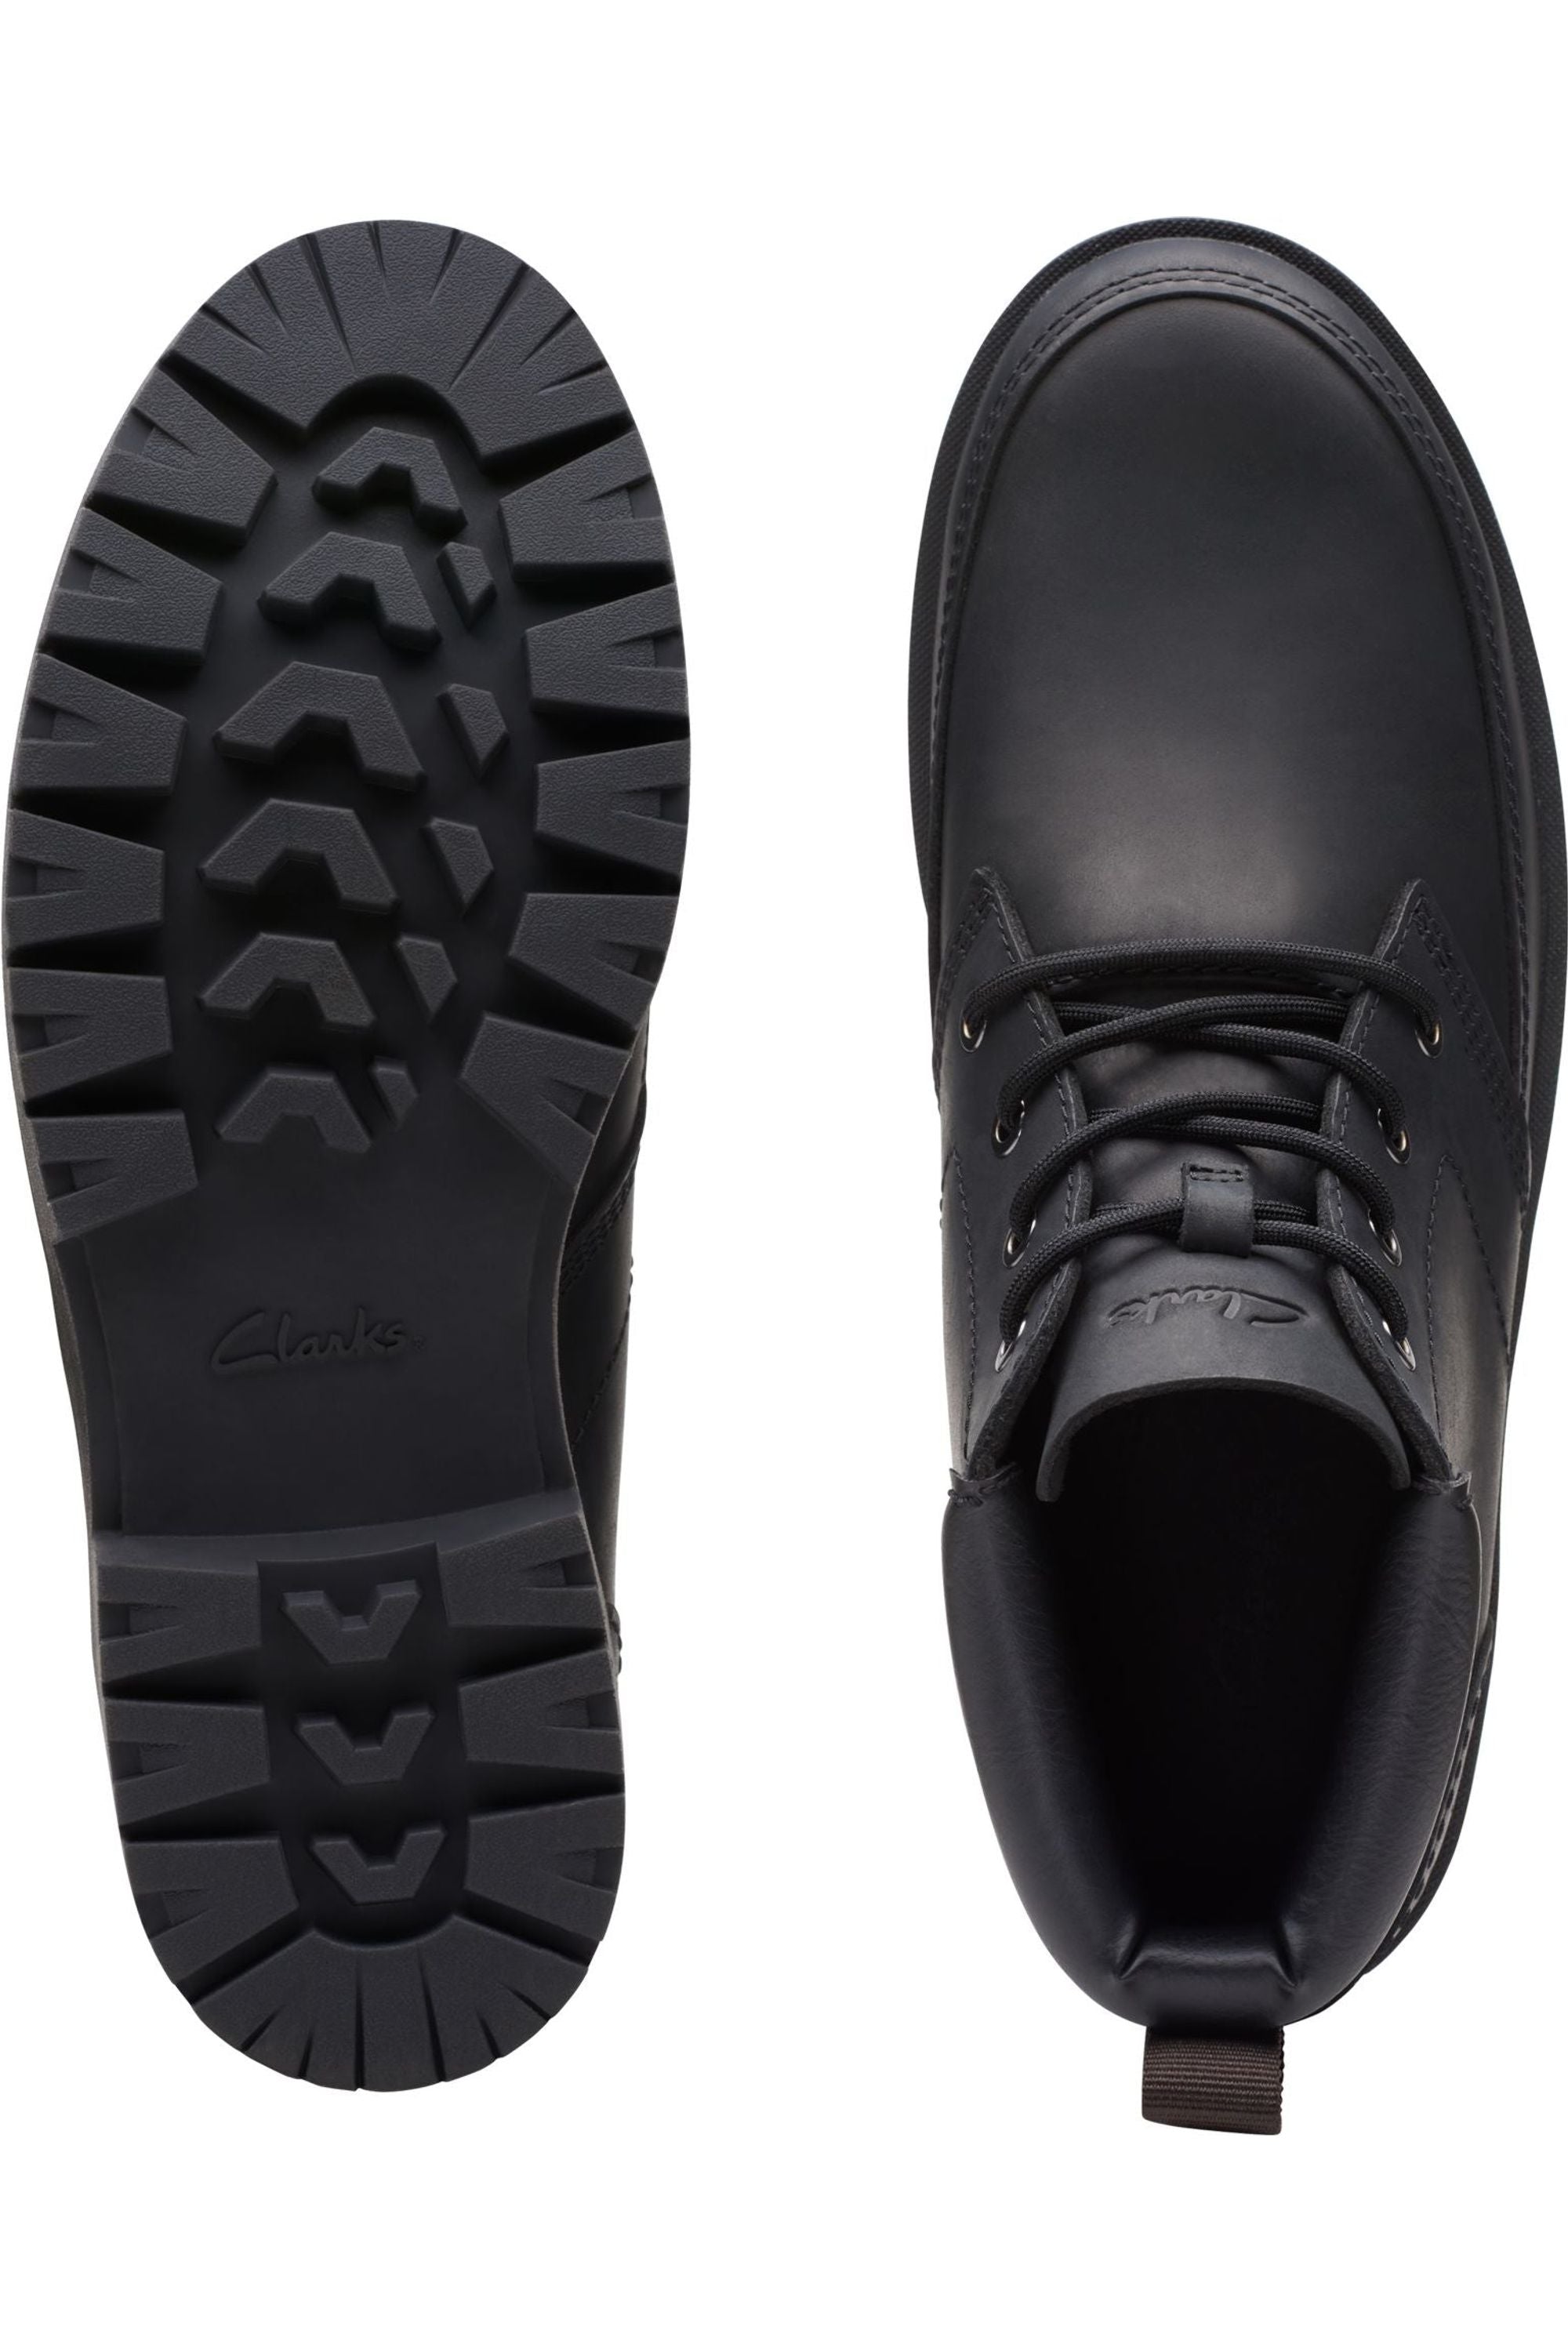 Clarks Mens Rossdale Mid in Black Leather